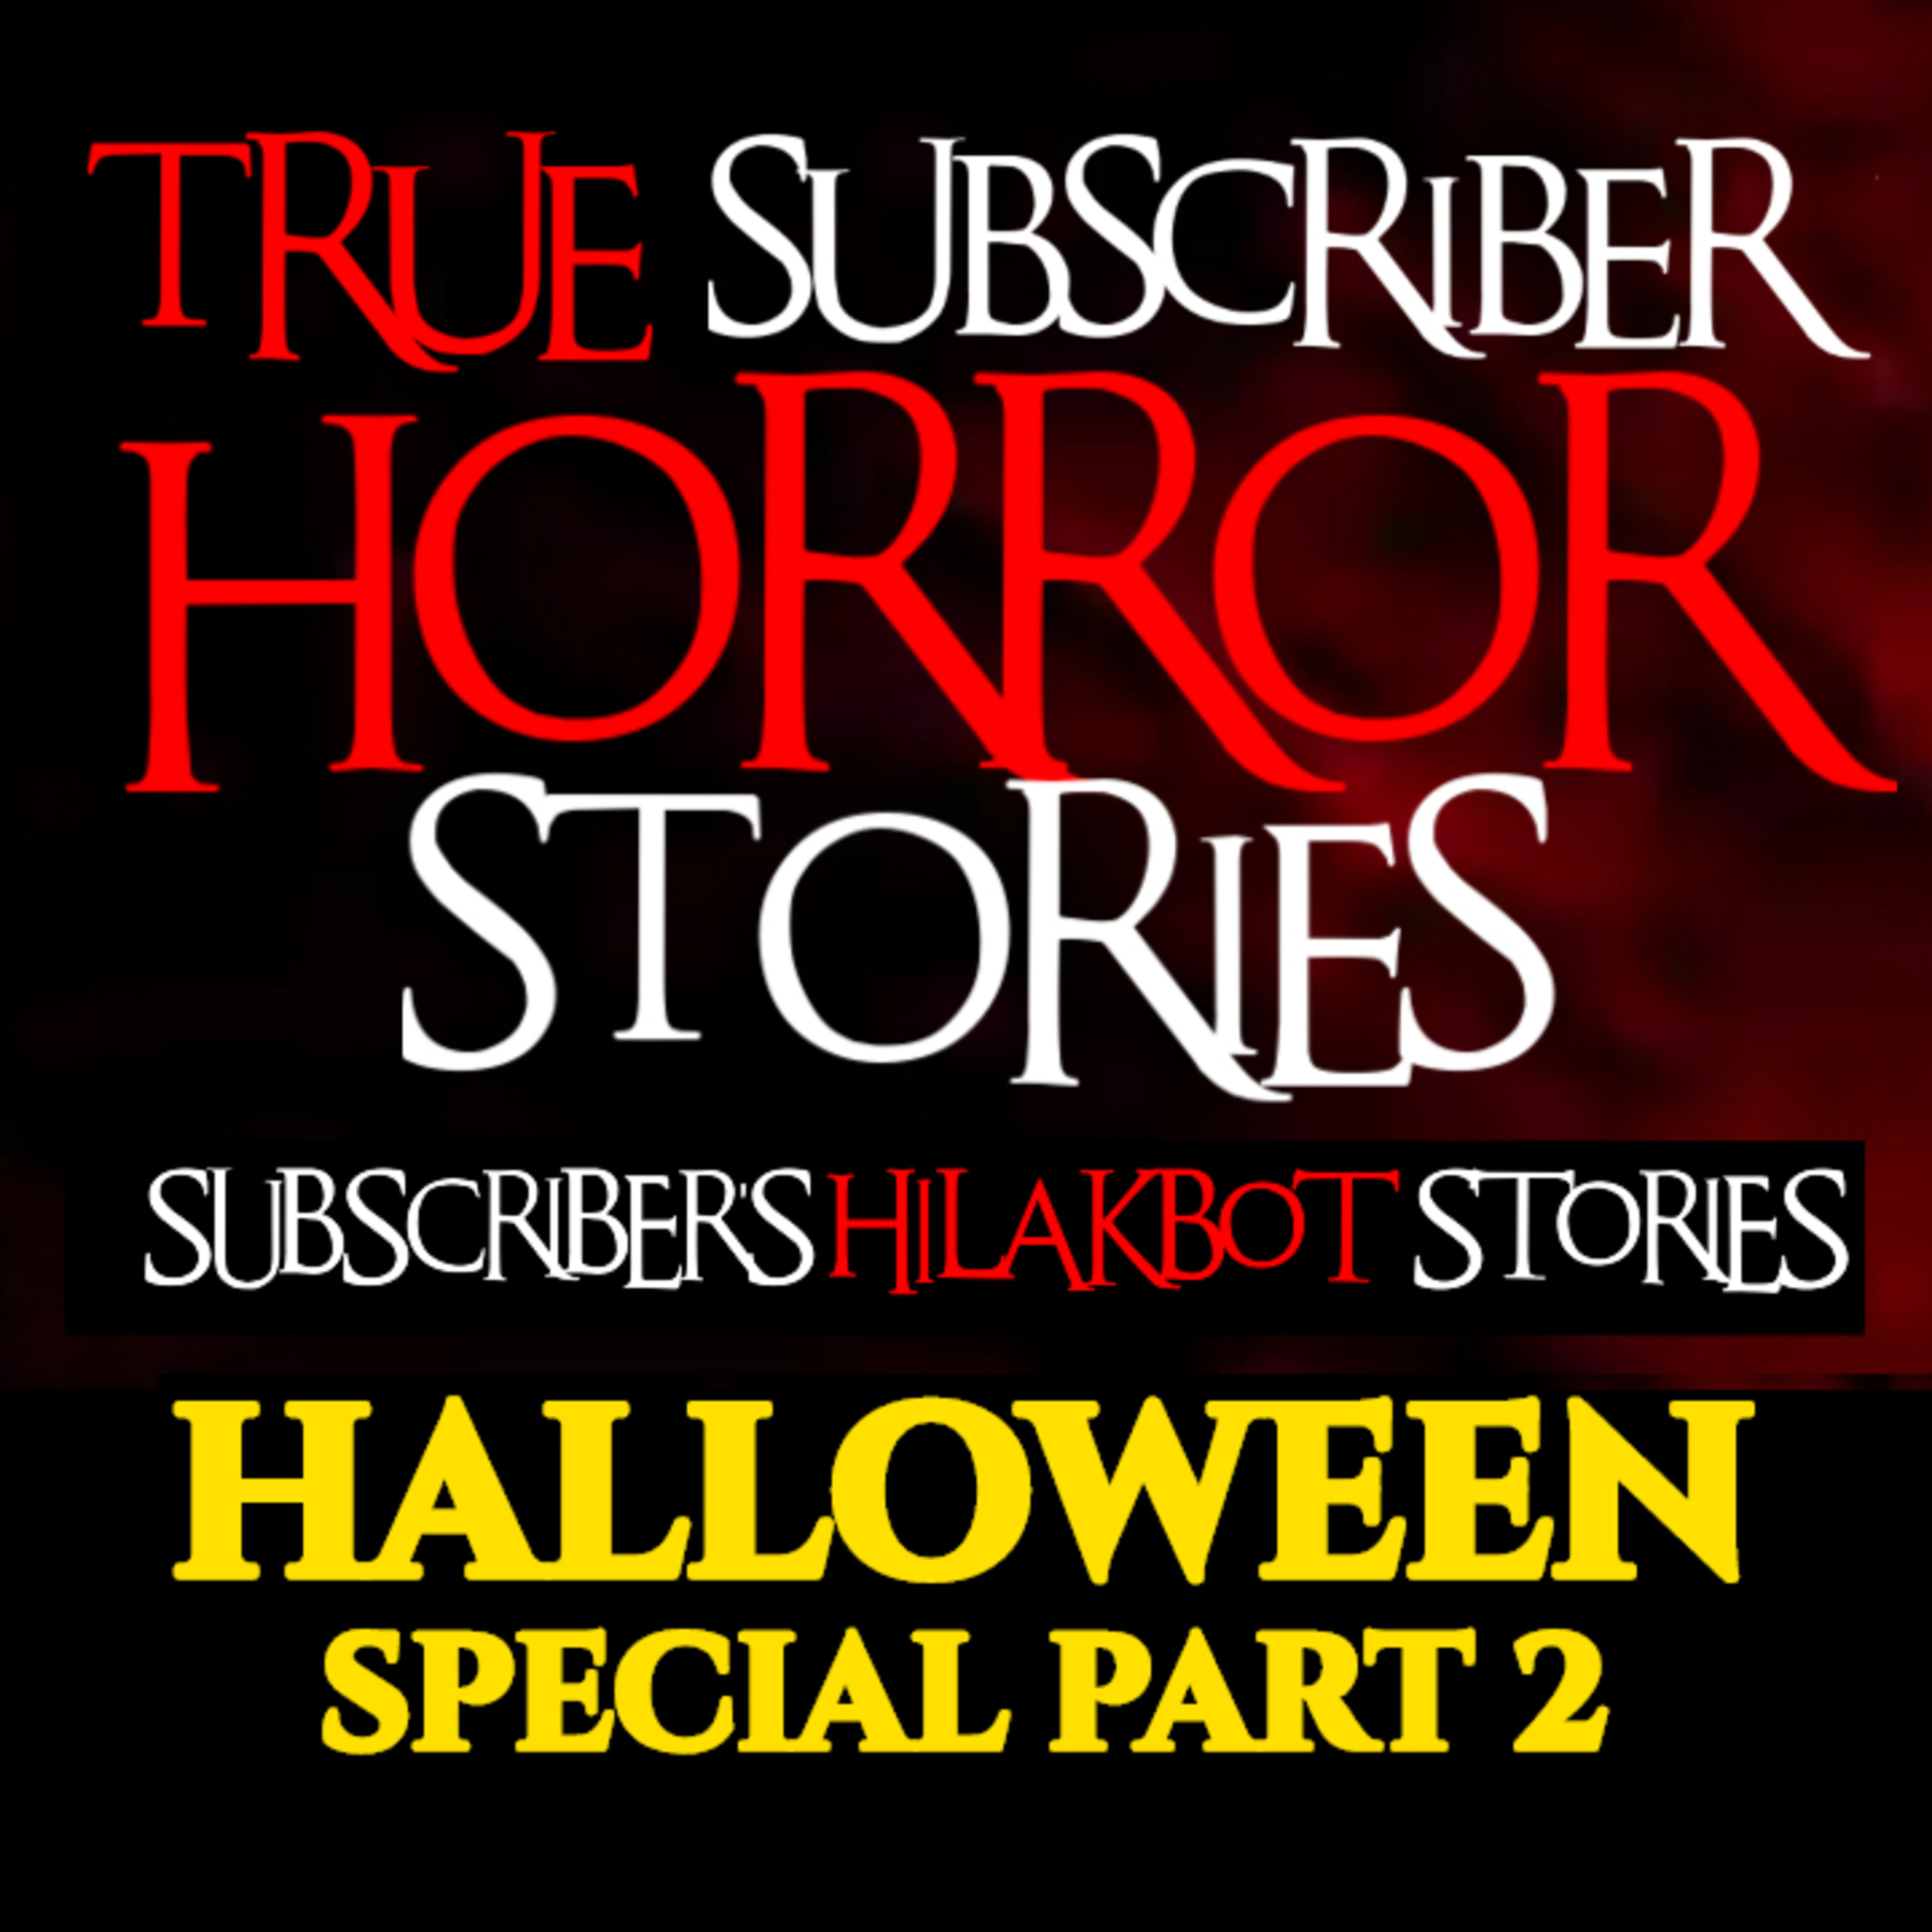 SUBSCRIBERS' HILAKBOT STORIES HALLOWEEN SPECIAL | SUBSCRIBER'S VOICE MESSAGES PART 2